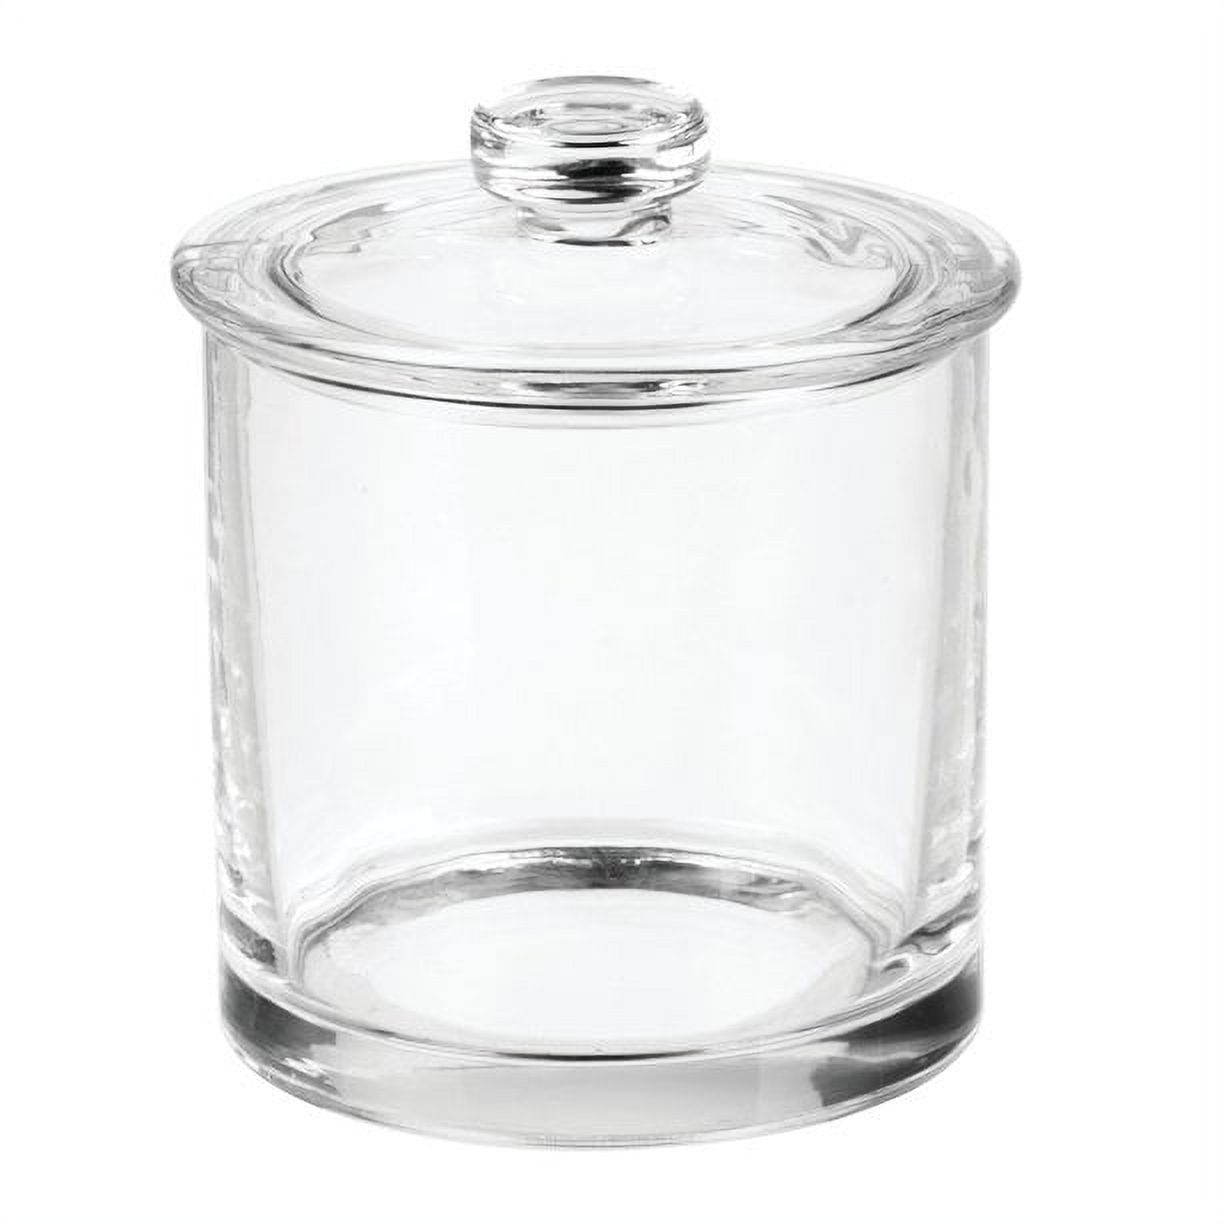 Better Homes & Gardens Small Glass Apothecary Vanity Jar, Clear - image 3 of 6